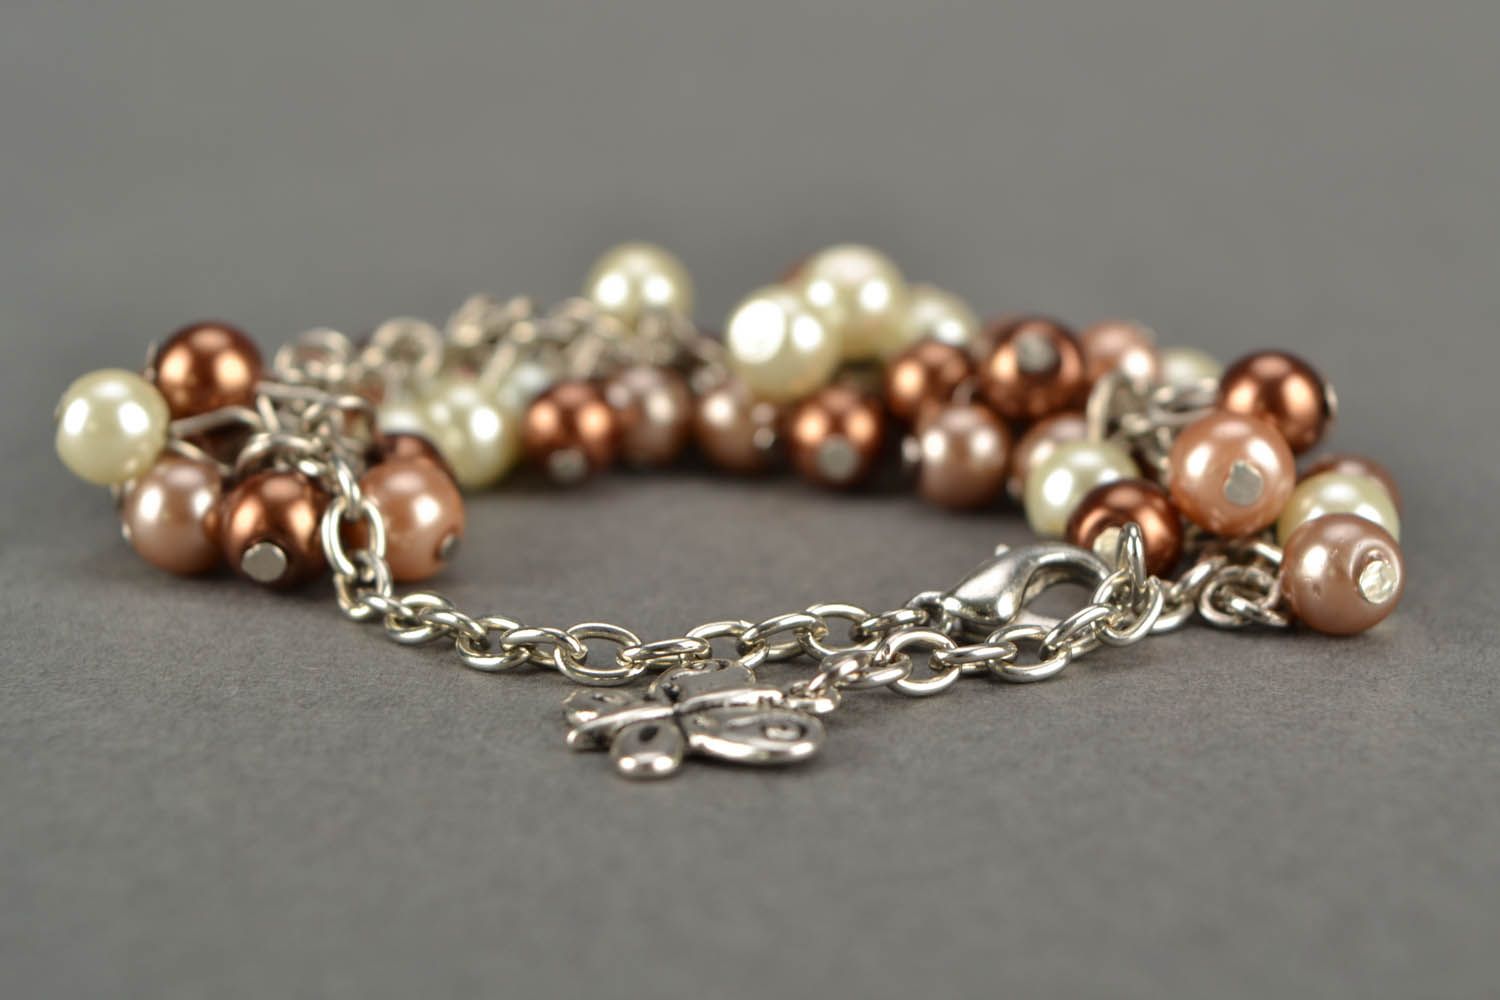 Bracelet made of artificial pearls with charm photo 4